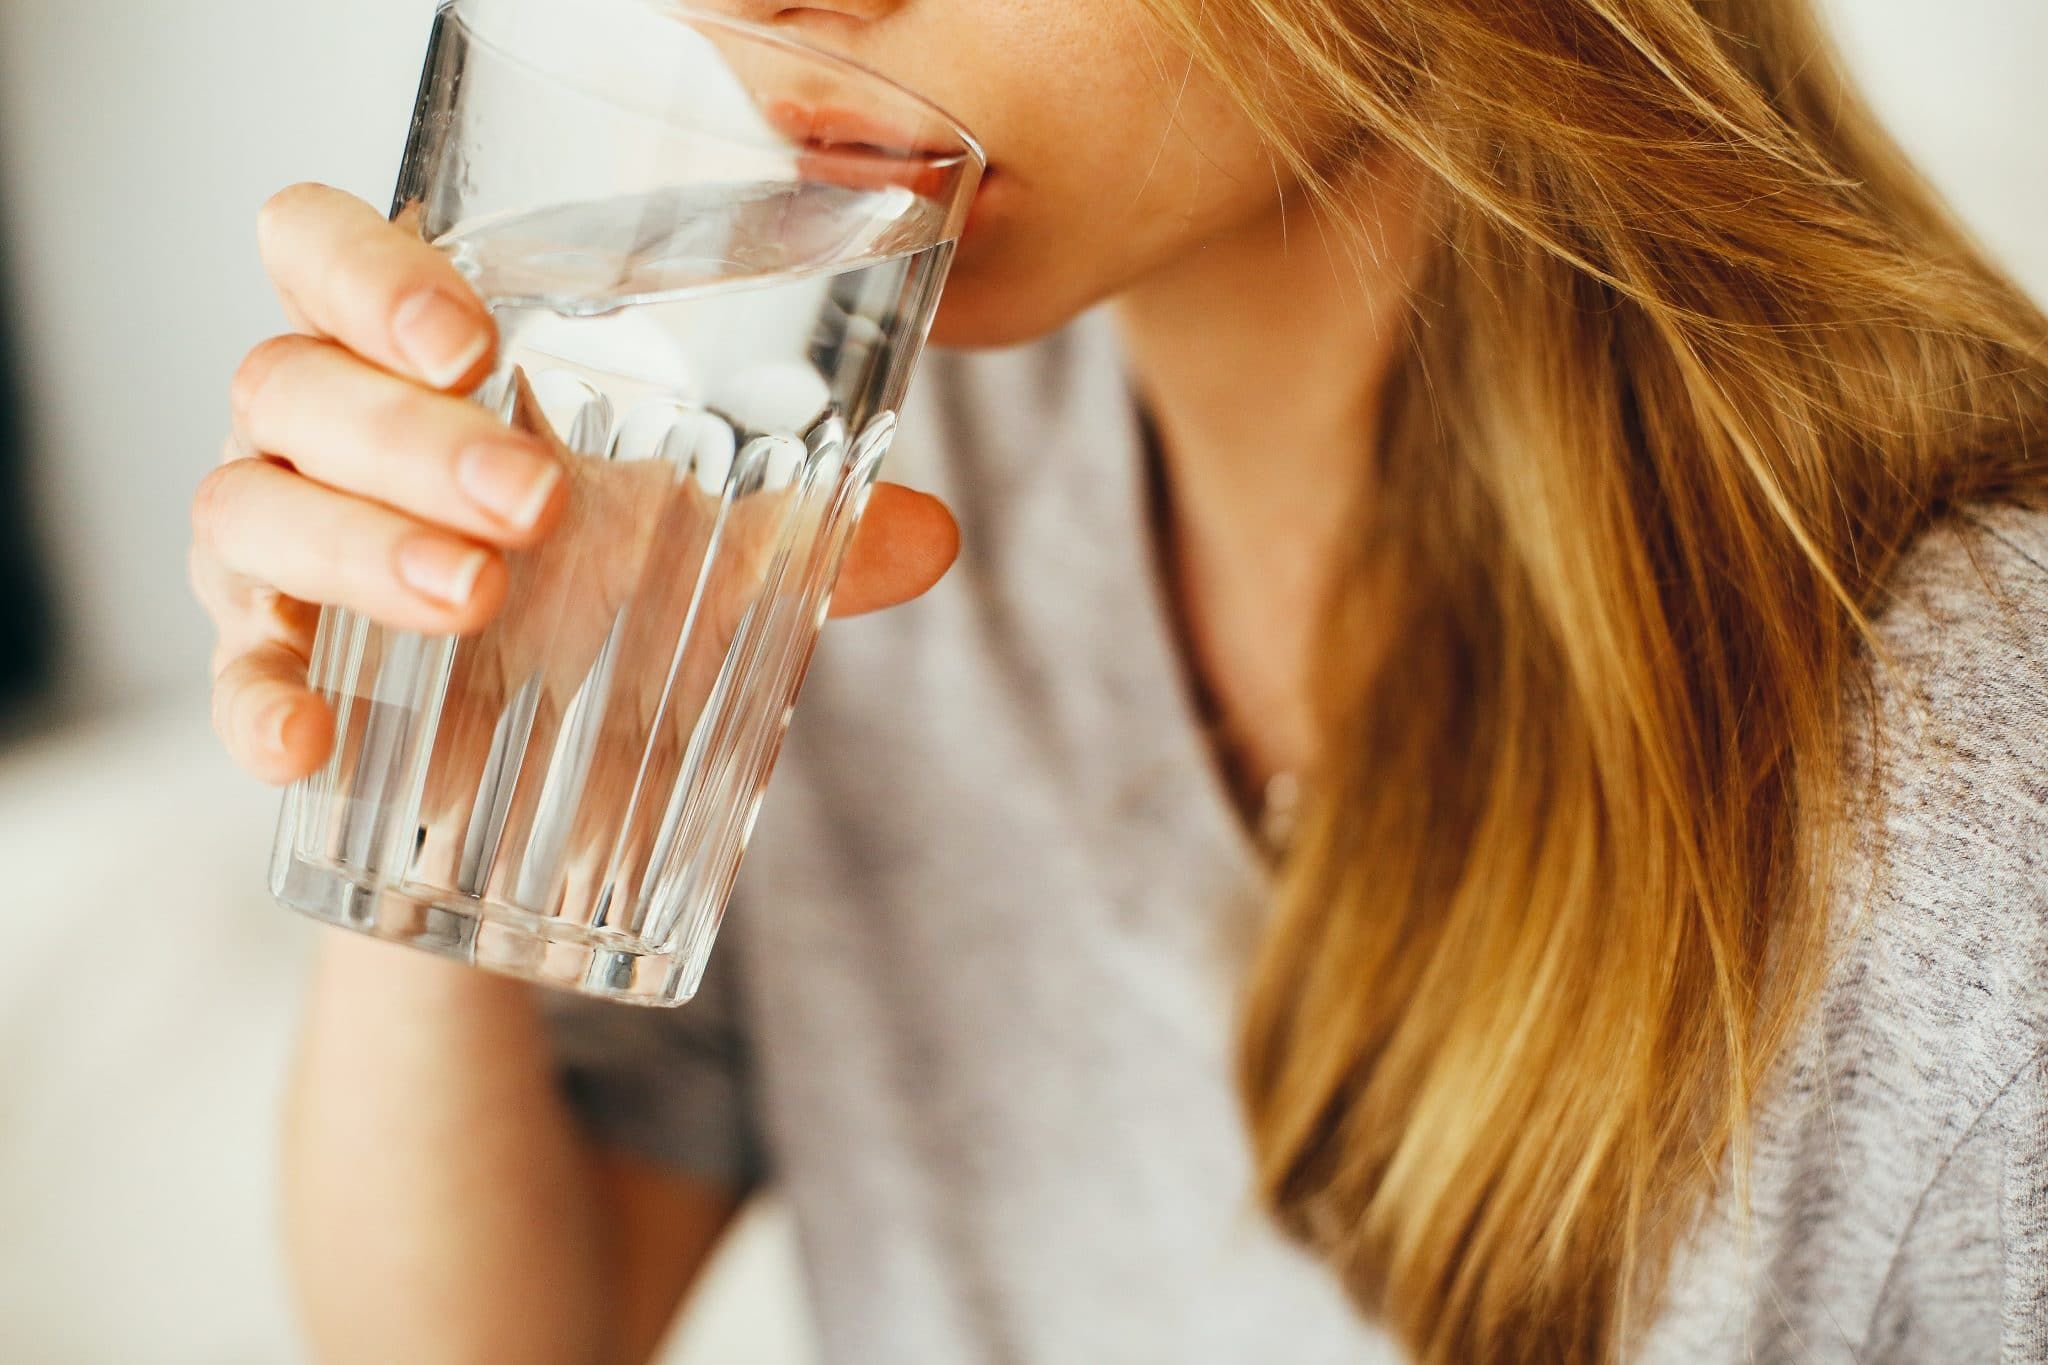 How to drink water as per ayurveda 1